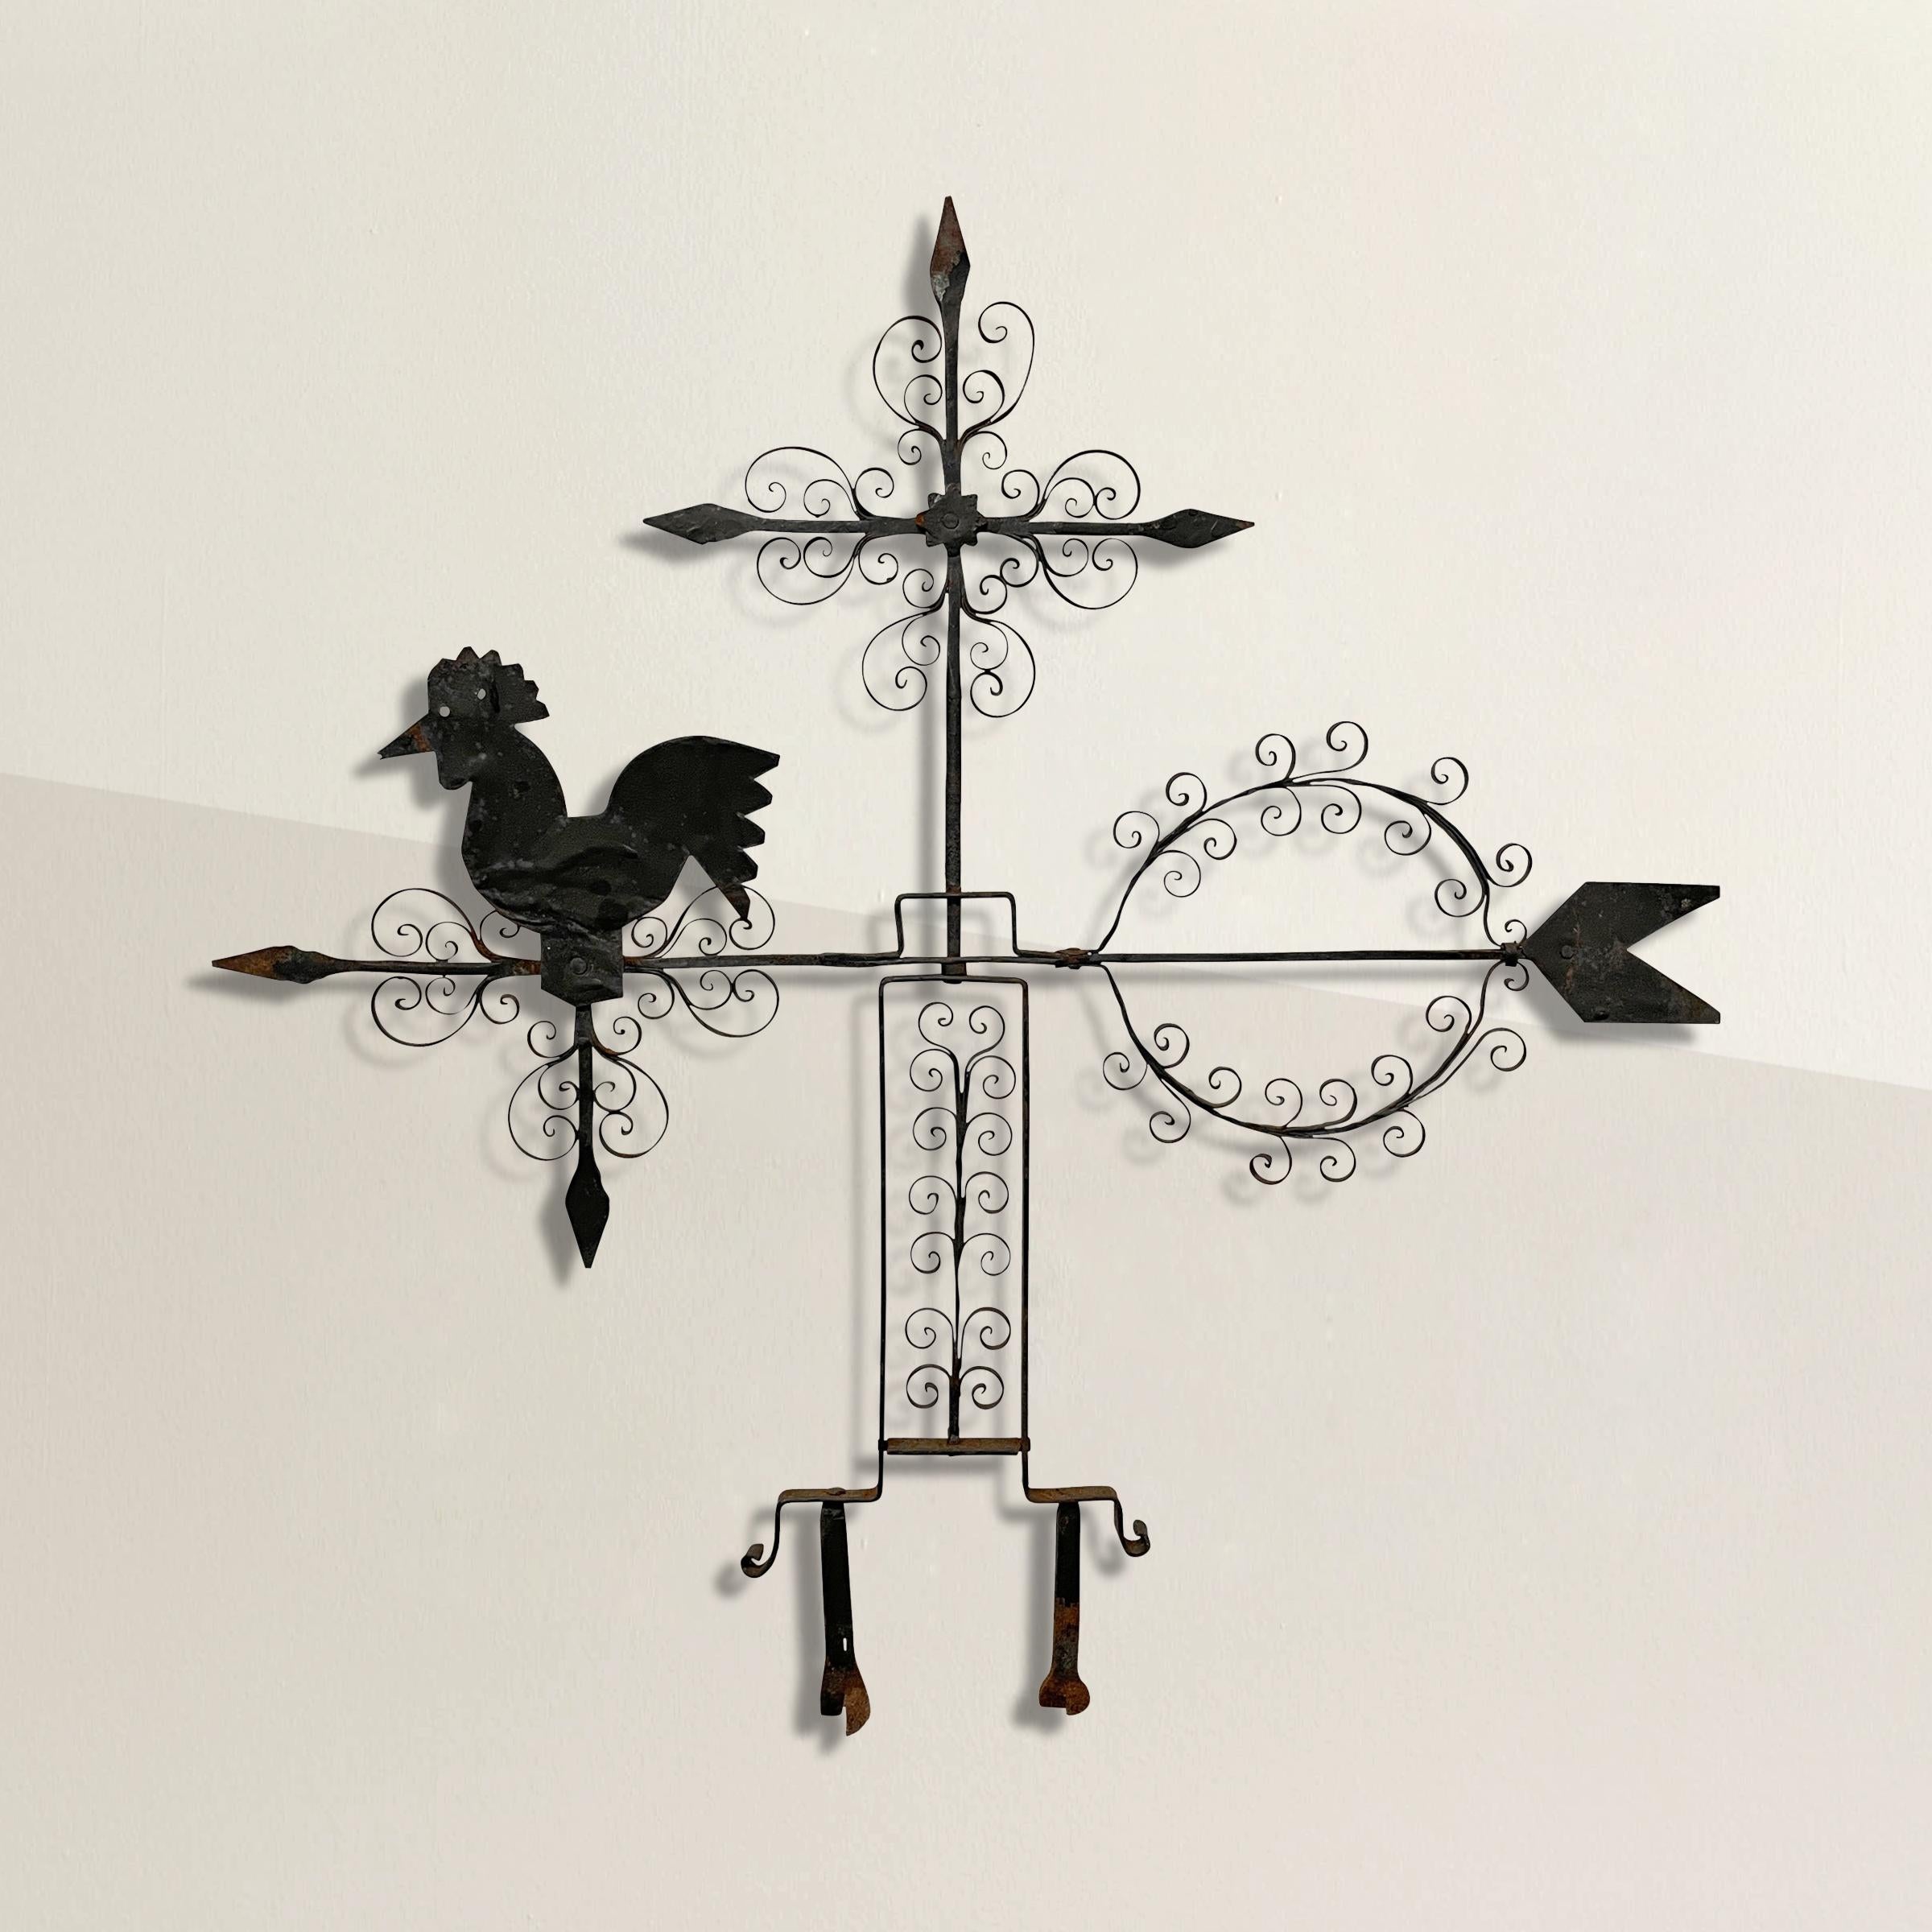 A wonderfully whimsical early 20th century Folk Art hand-wrought iron weathervane with a rooster standing on the tip of the arrow, a greek cross at top, and a wreath at the back of the arrow, and all decorated with hand-wrought curly floral